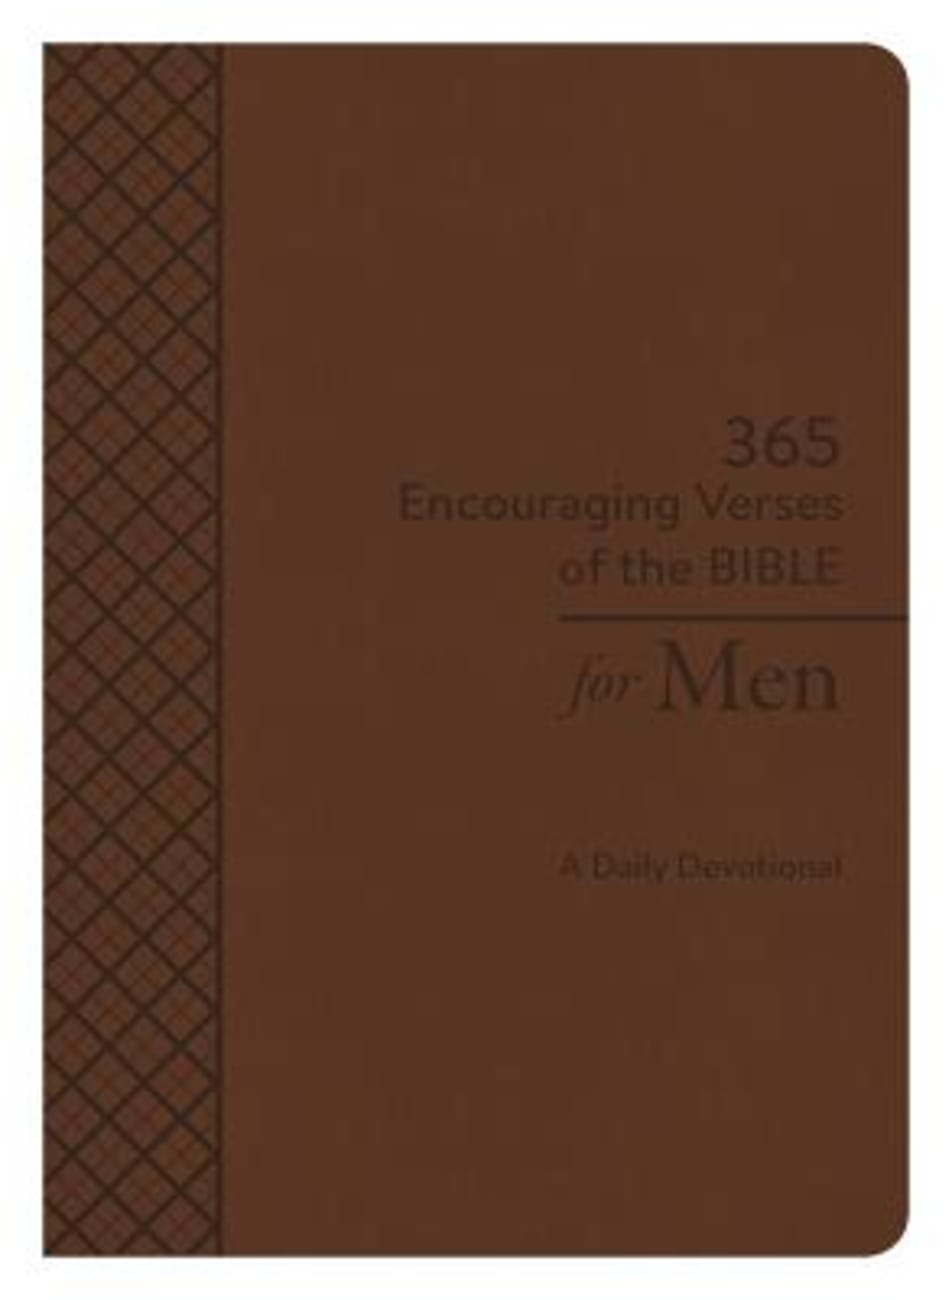 365 Encouraging Verses of the Bible For Men: A Daily Devotional Paperback